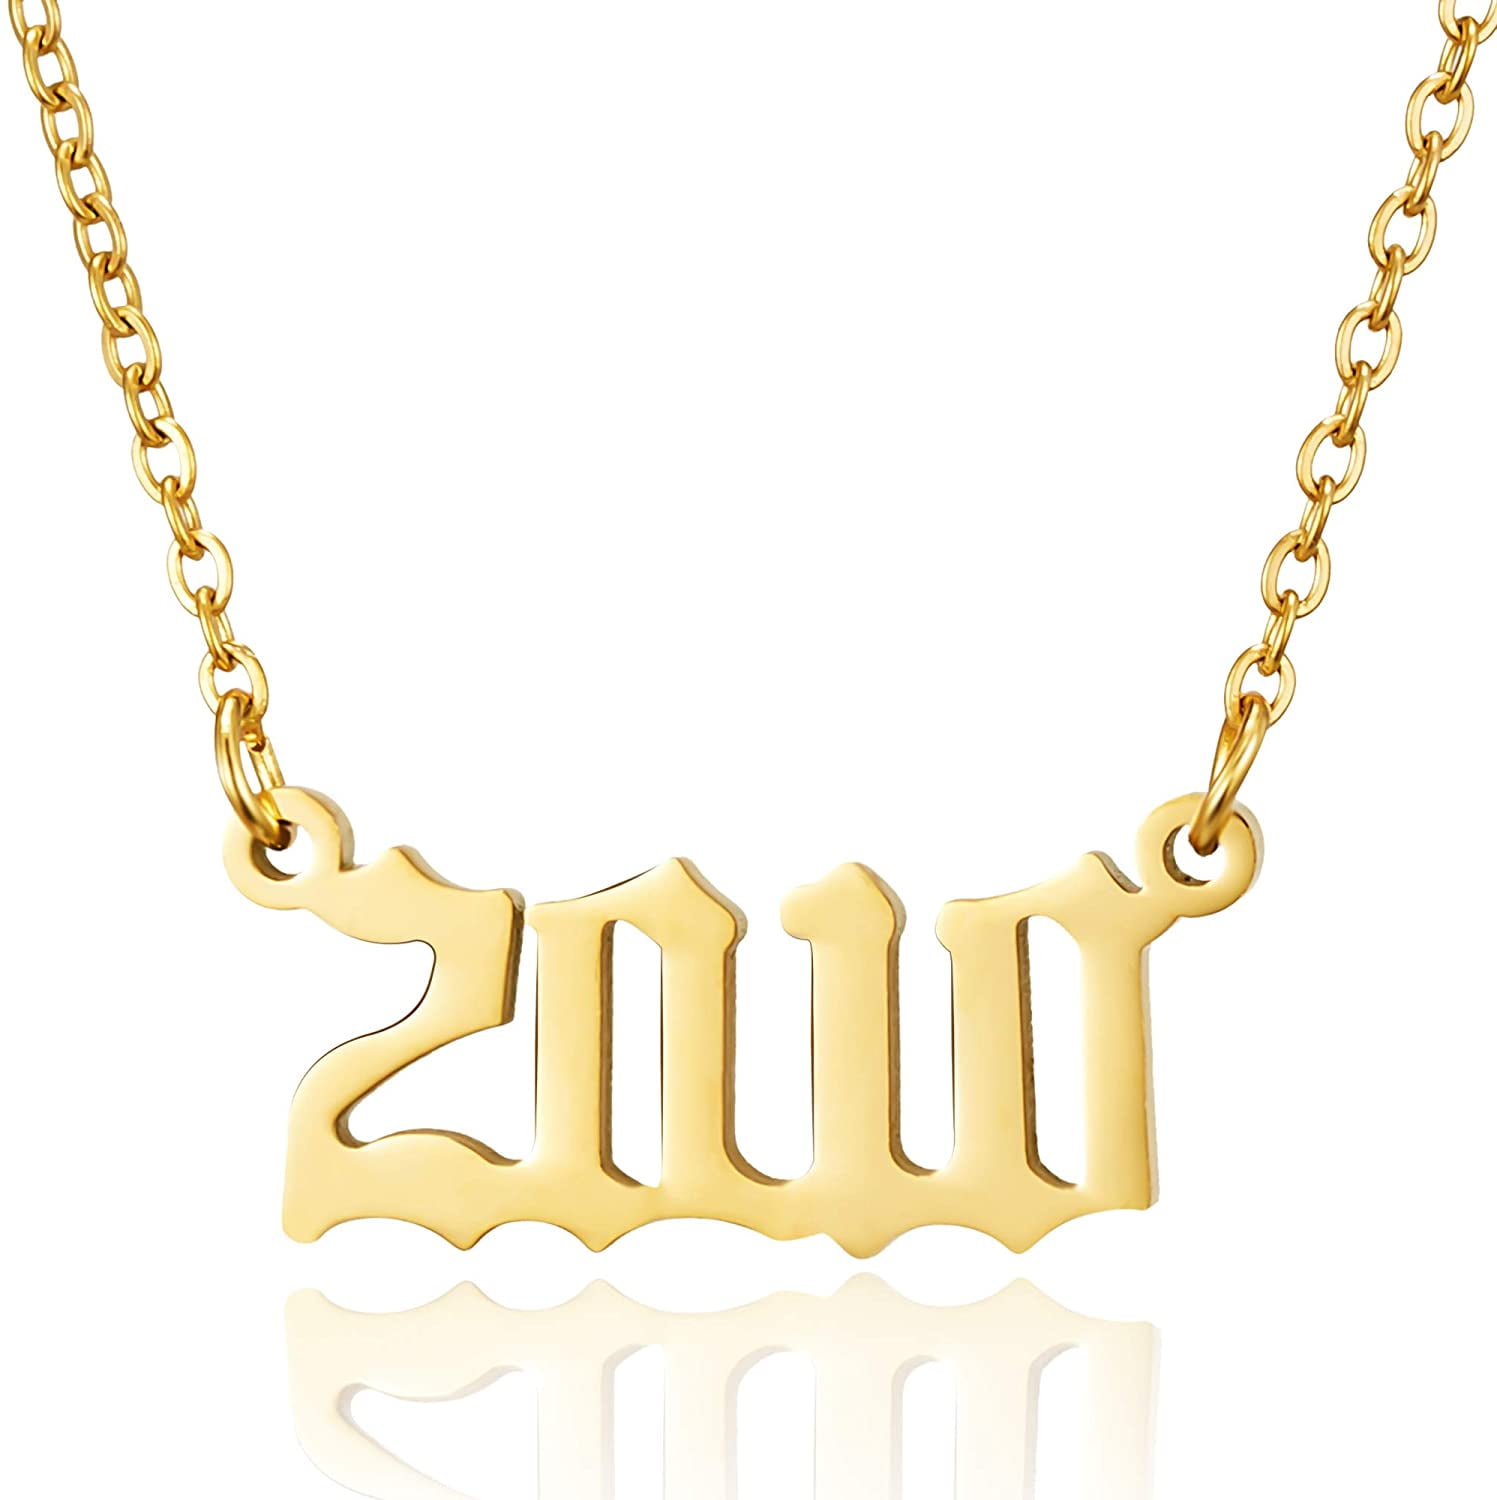 RINHOO Birth Year Number Pendant Necklace Stainless Steel Gold Number Birthday Necklace Chain Jewelry for Women Girl 